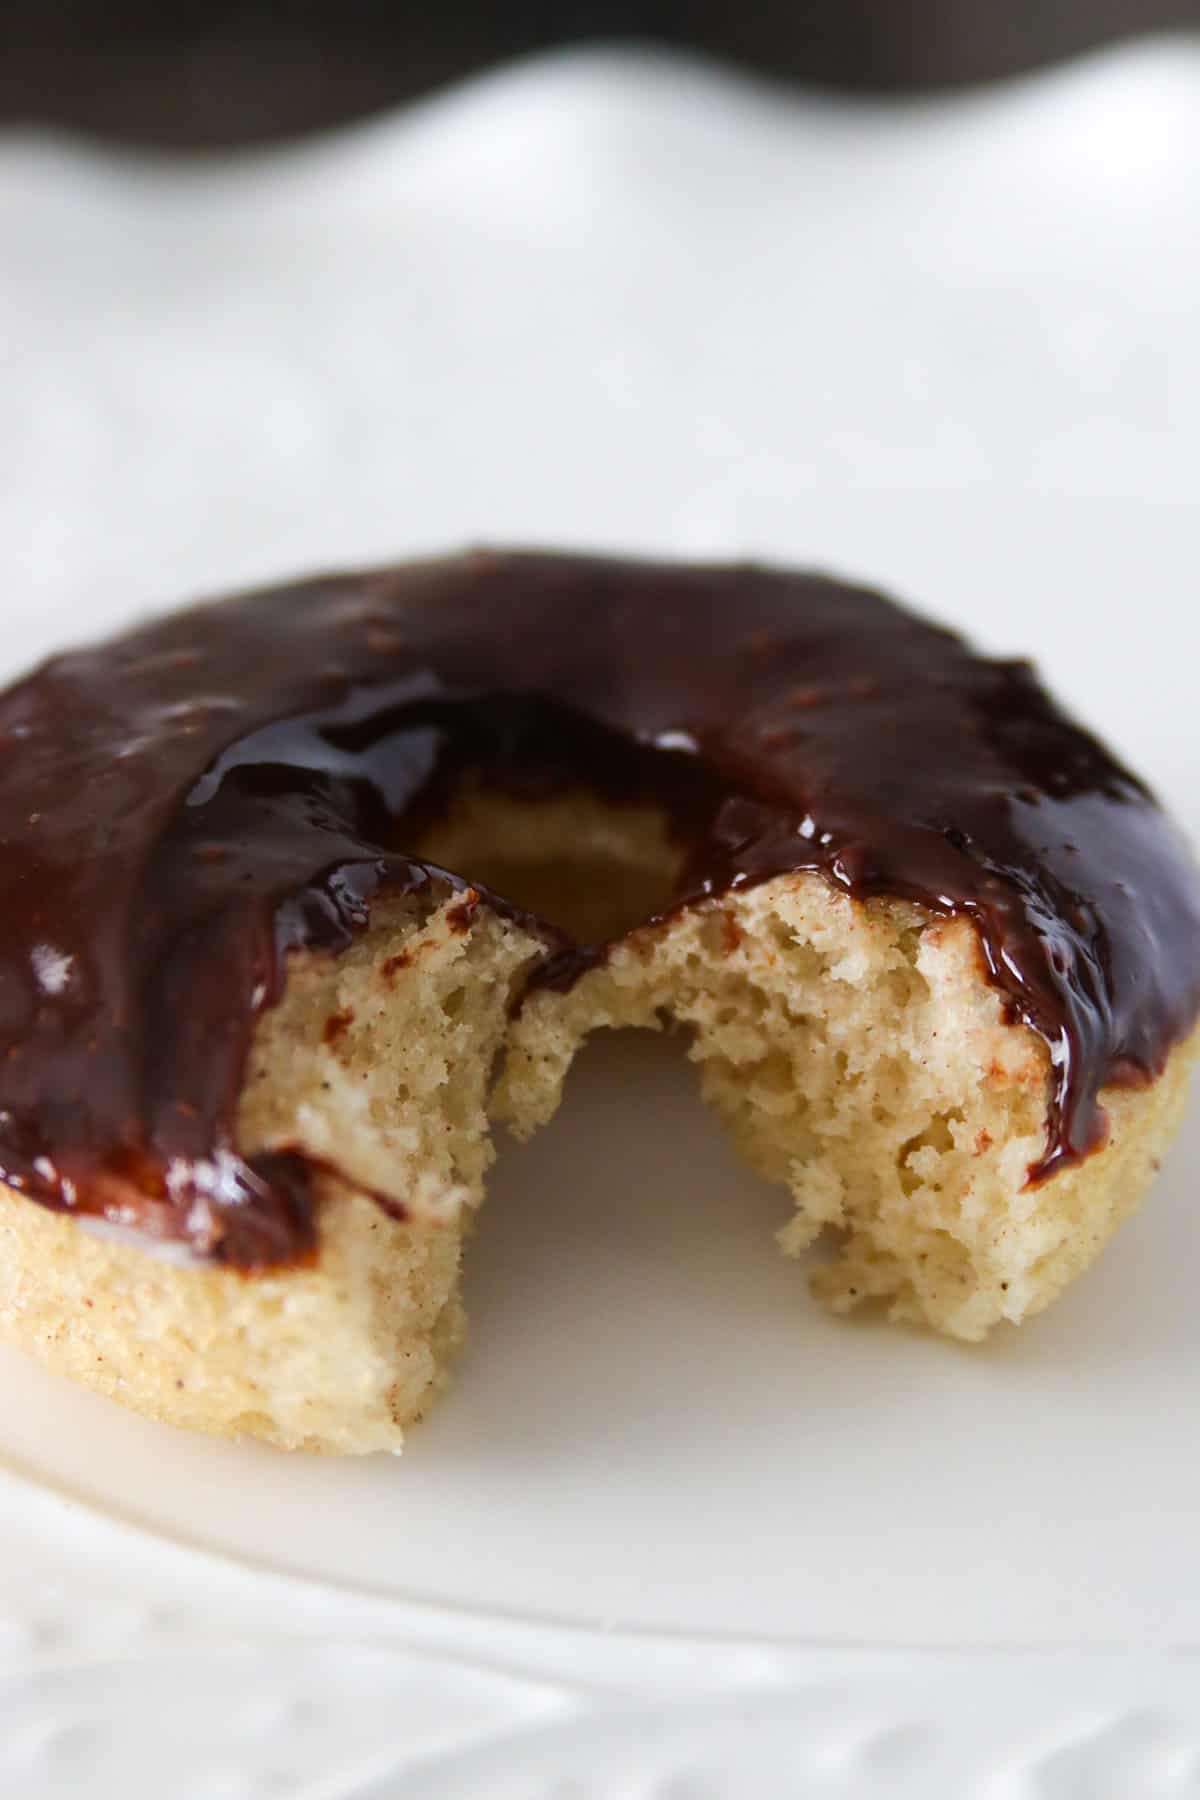 A chocolate donut with a bite, showing the crumbs.